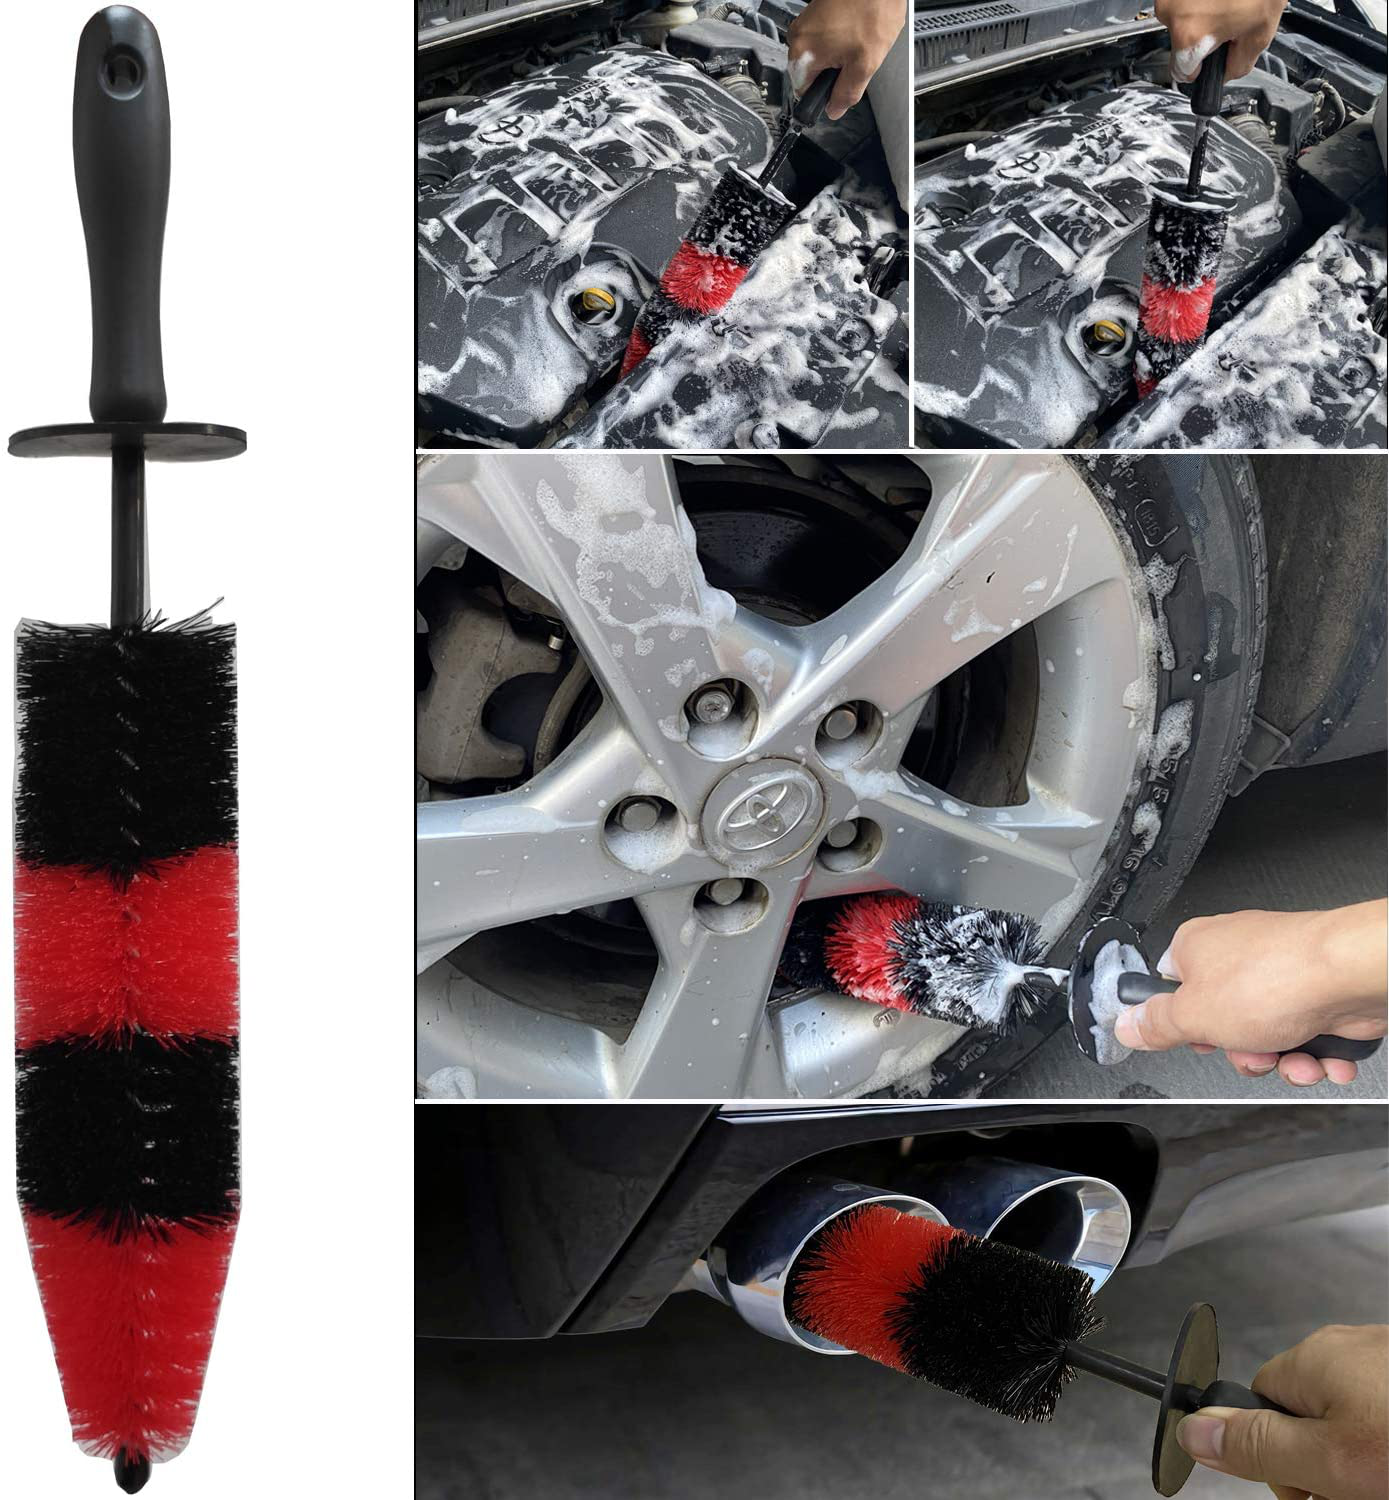 LUCKLYJONE 7Pcs Wheel & Tire Brush, car Detailing kit, 17inch Long Soft Wheel Brush 5 car wash Detail Brush car wash kit for Cleans Dirty Tires & Releases Dirt and Road Grime, Short Handle